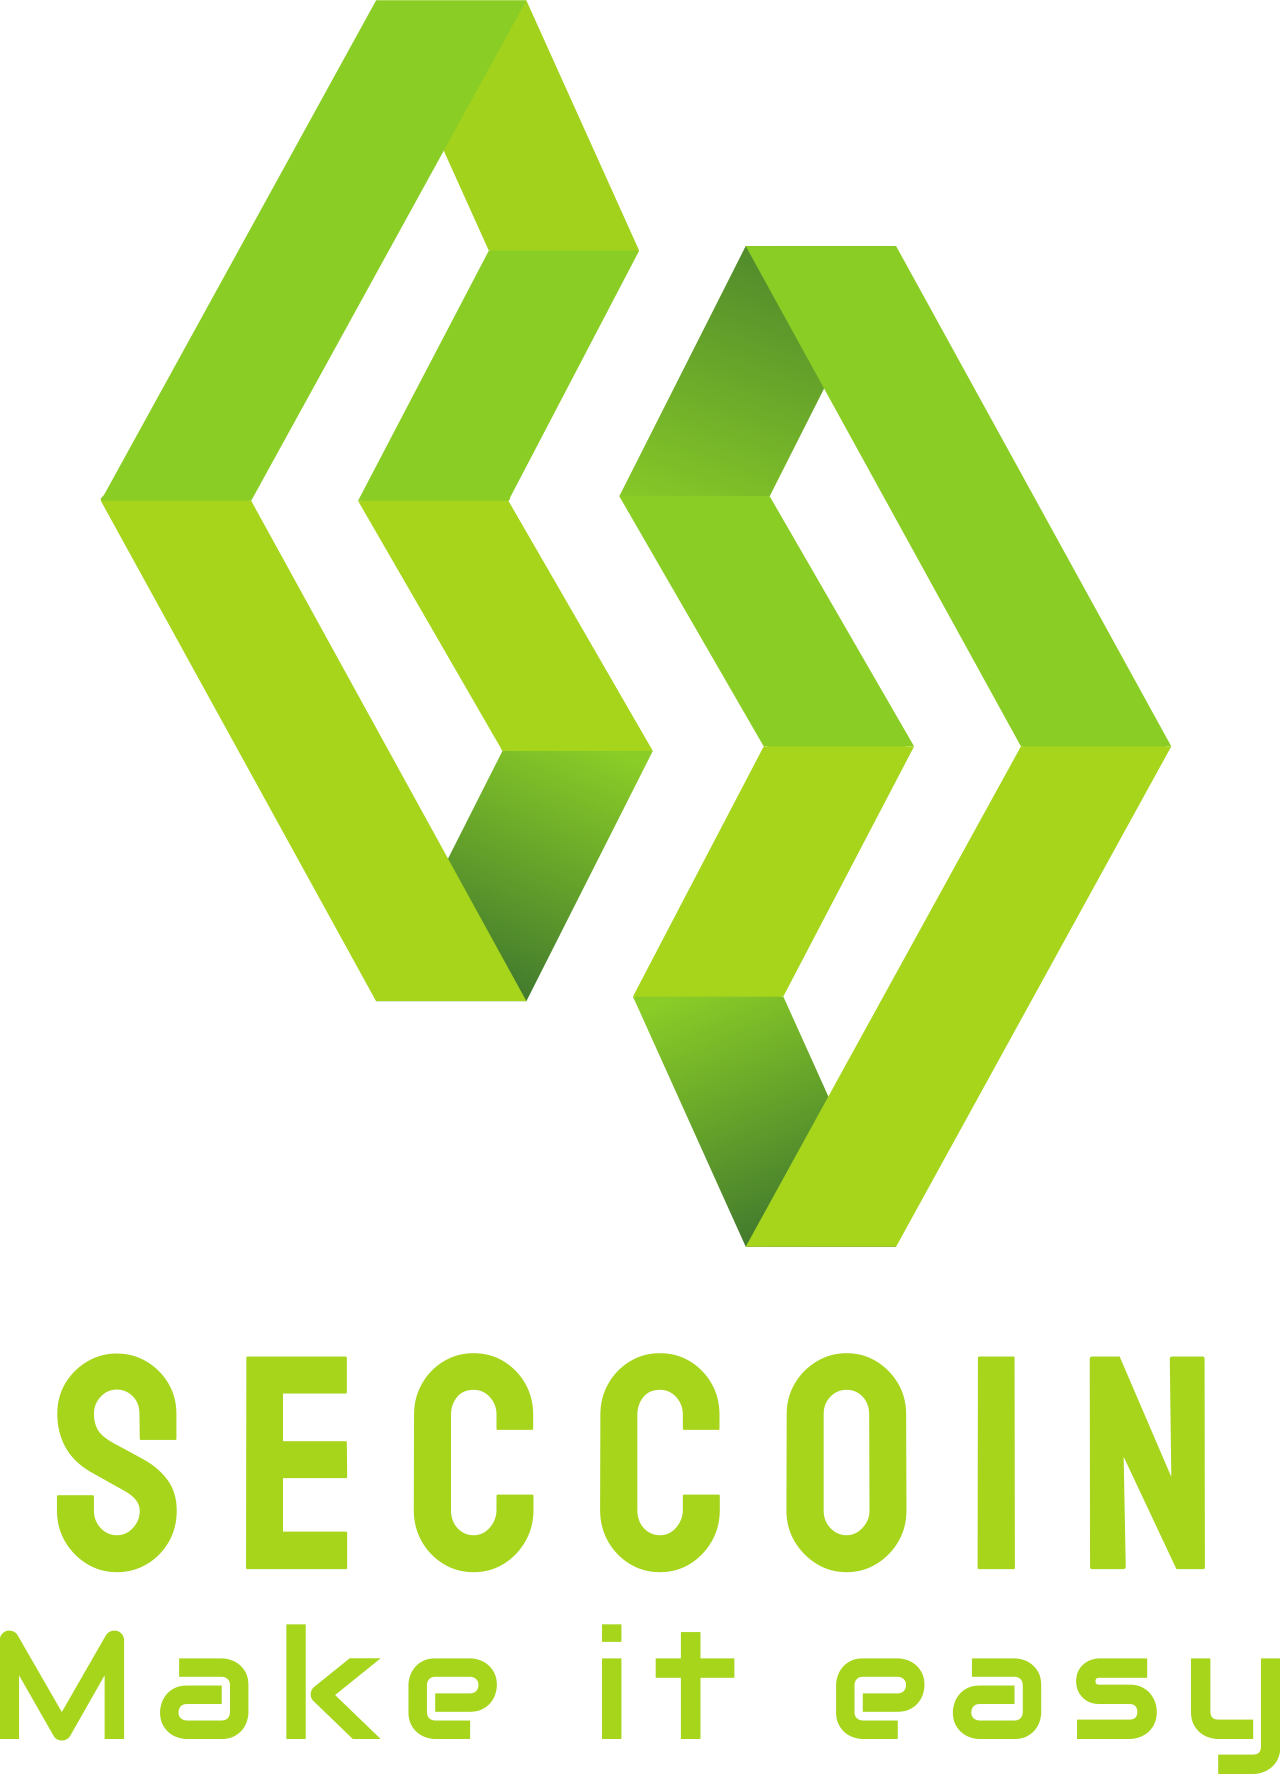 Seccoin's web page